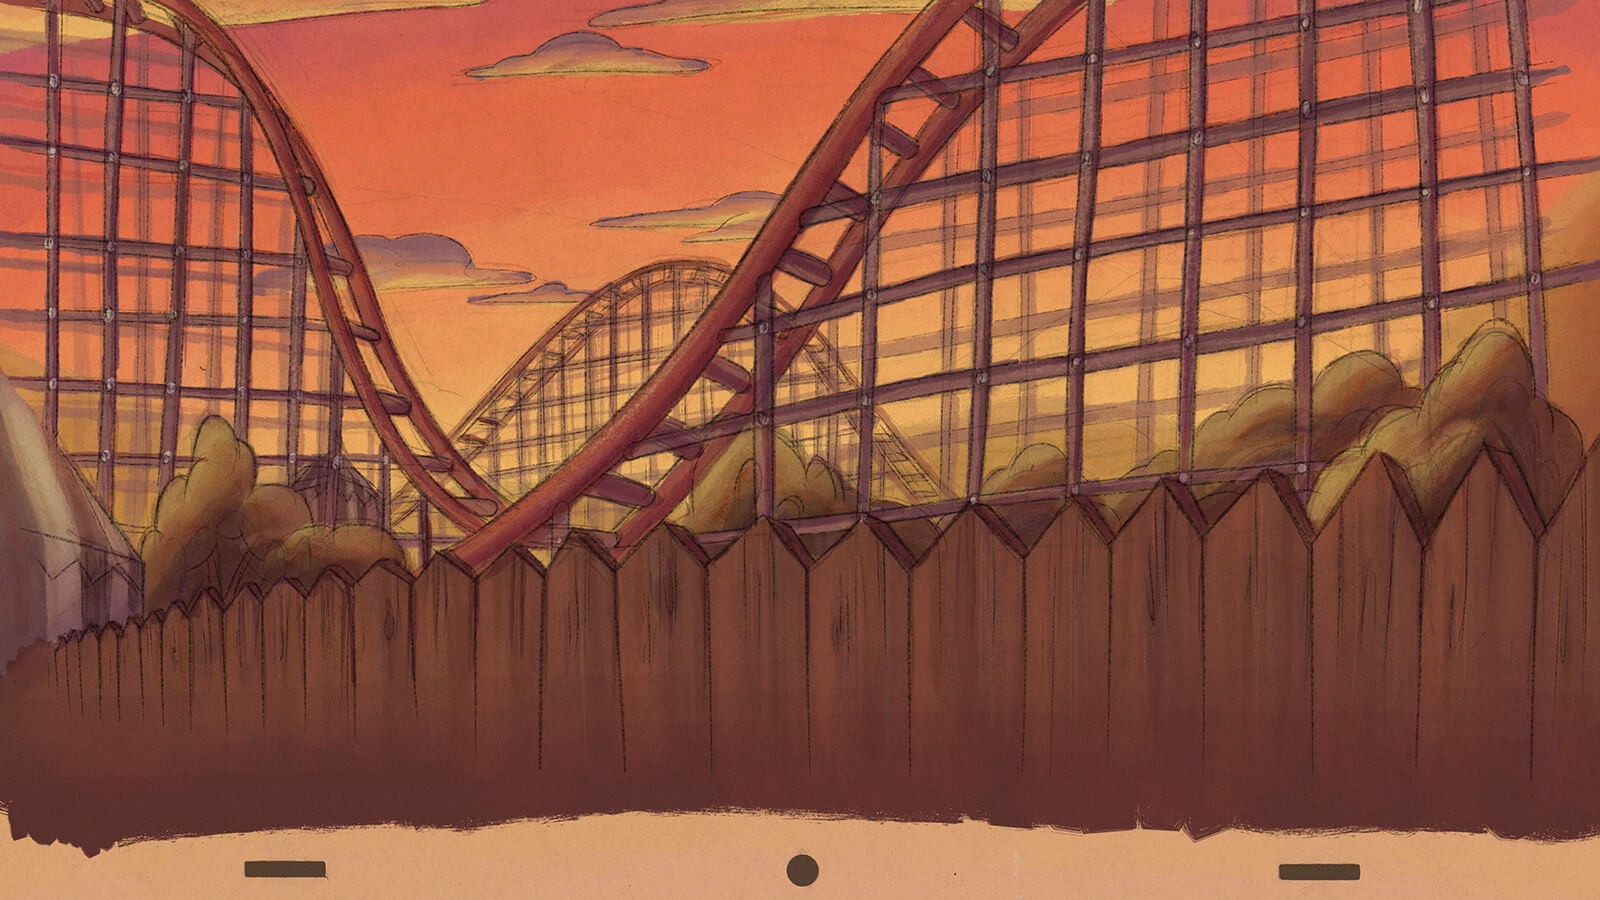 Background artwork of the carnival and the roller coaster